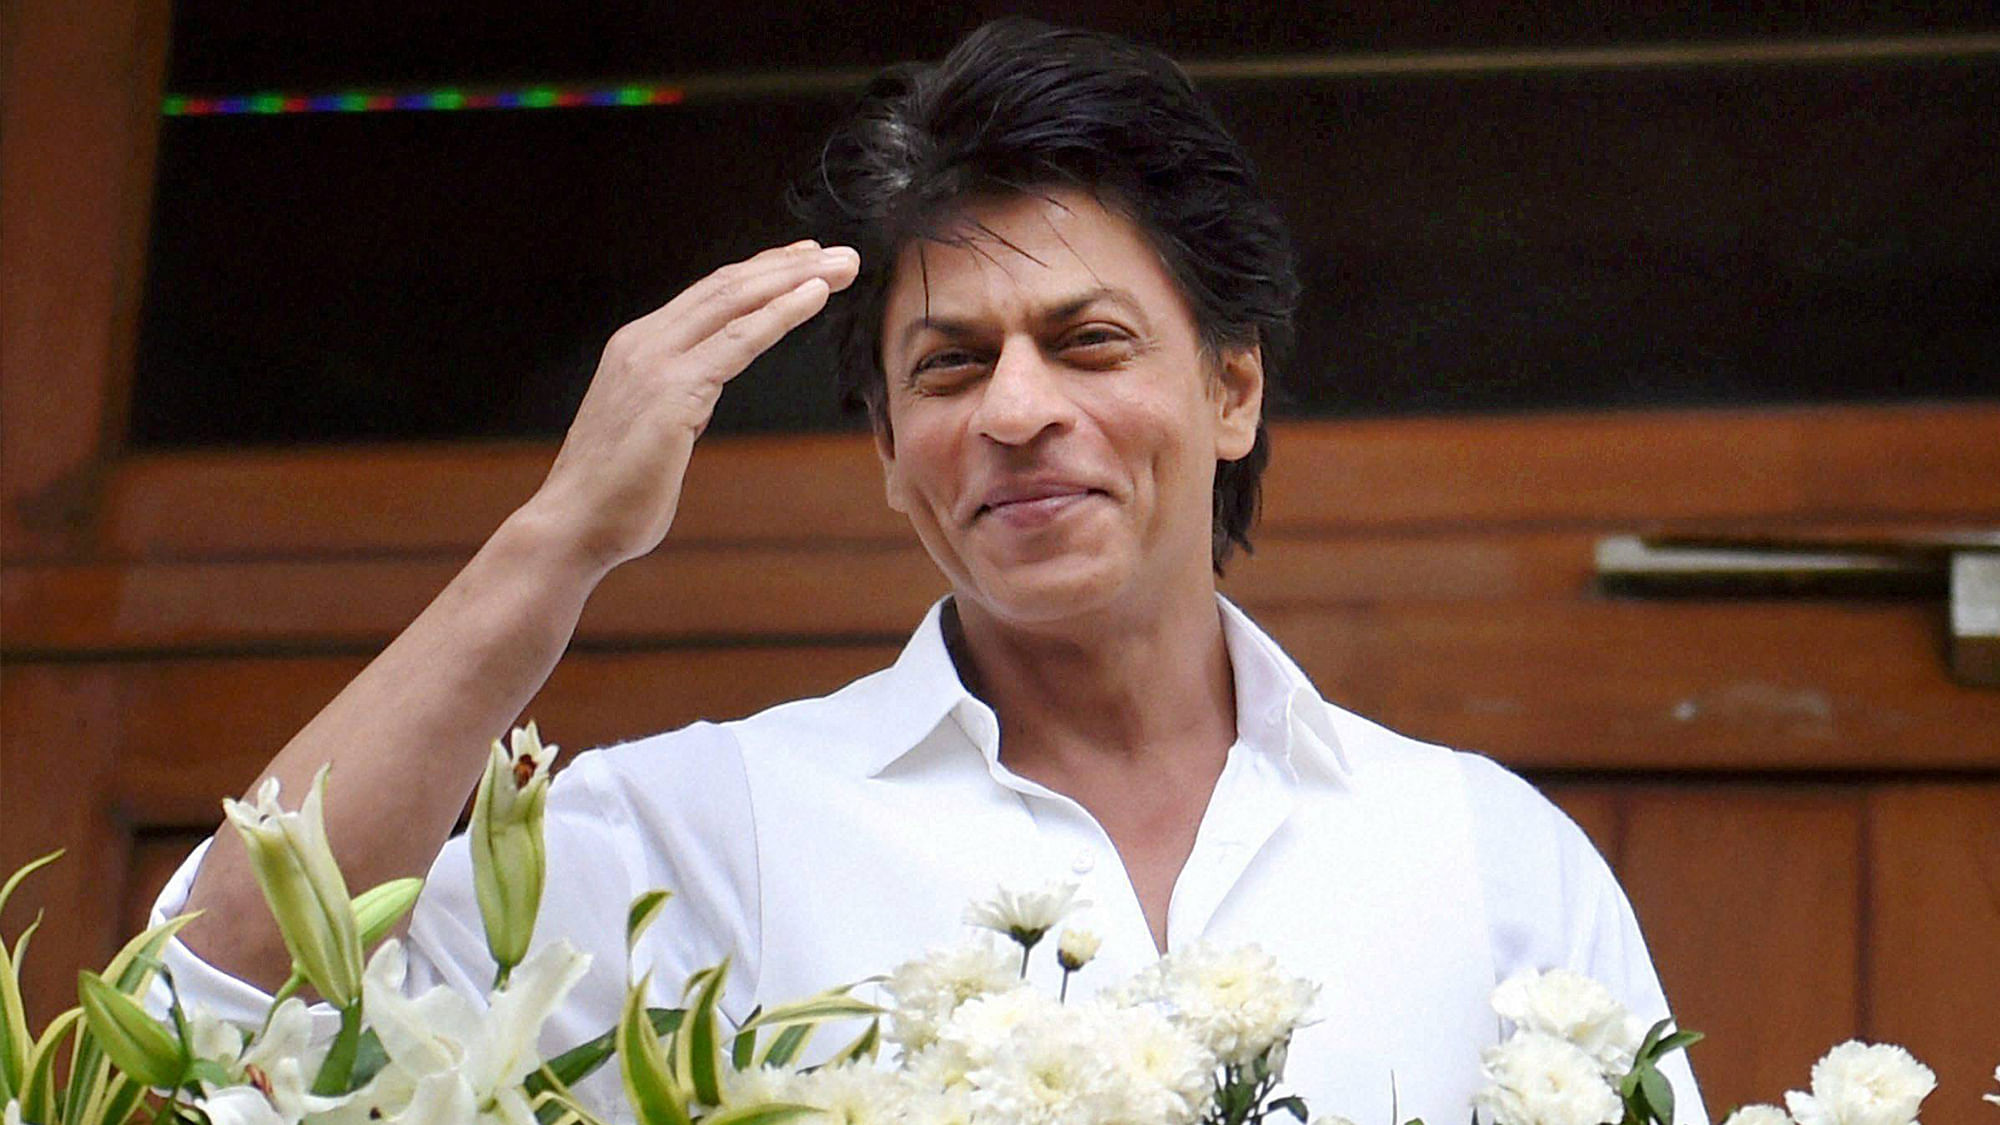 Actor Shah Rukh Khan lends support to the Kerala flood victims.